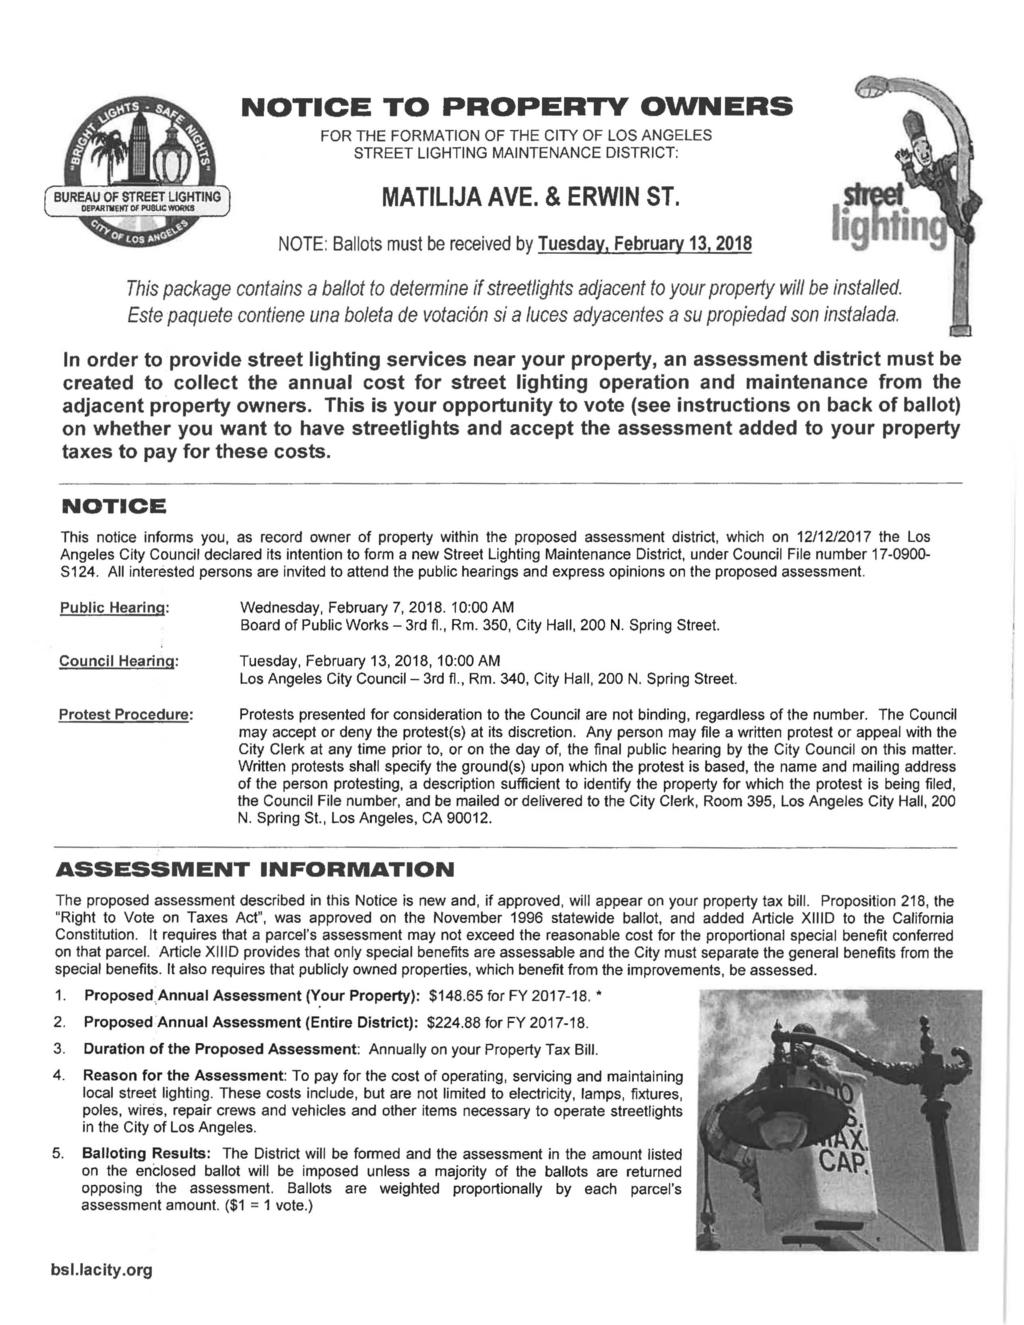 !l BUREAU OF STREET LIGHTING departhewt of pusuc works NOTICE TO PROPERTY OWNERS FOR THE FORMATION OF THE CITY OF LOS ANGELES STREET LIGHTING MAINTENANCE DISTRICT: MATILIJA AVE. & ERWIN ST.